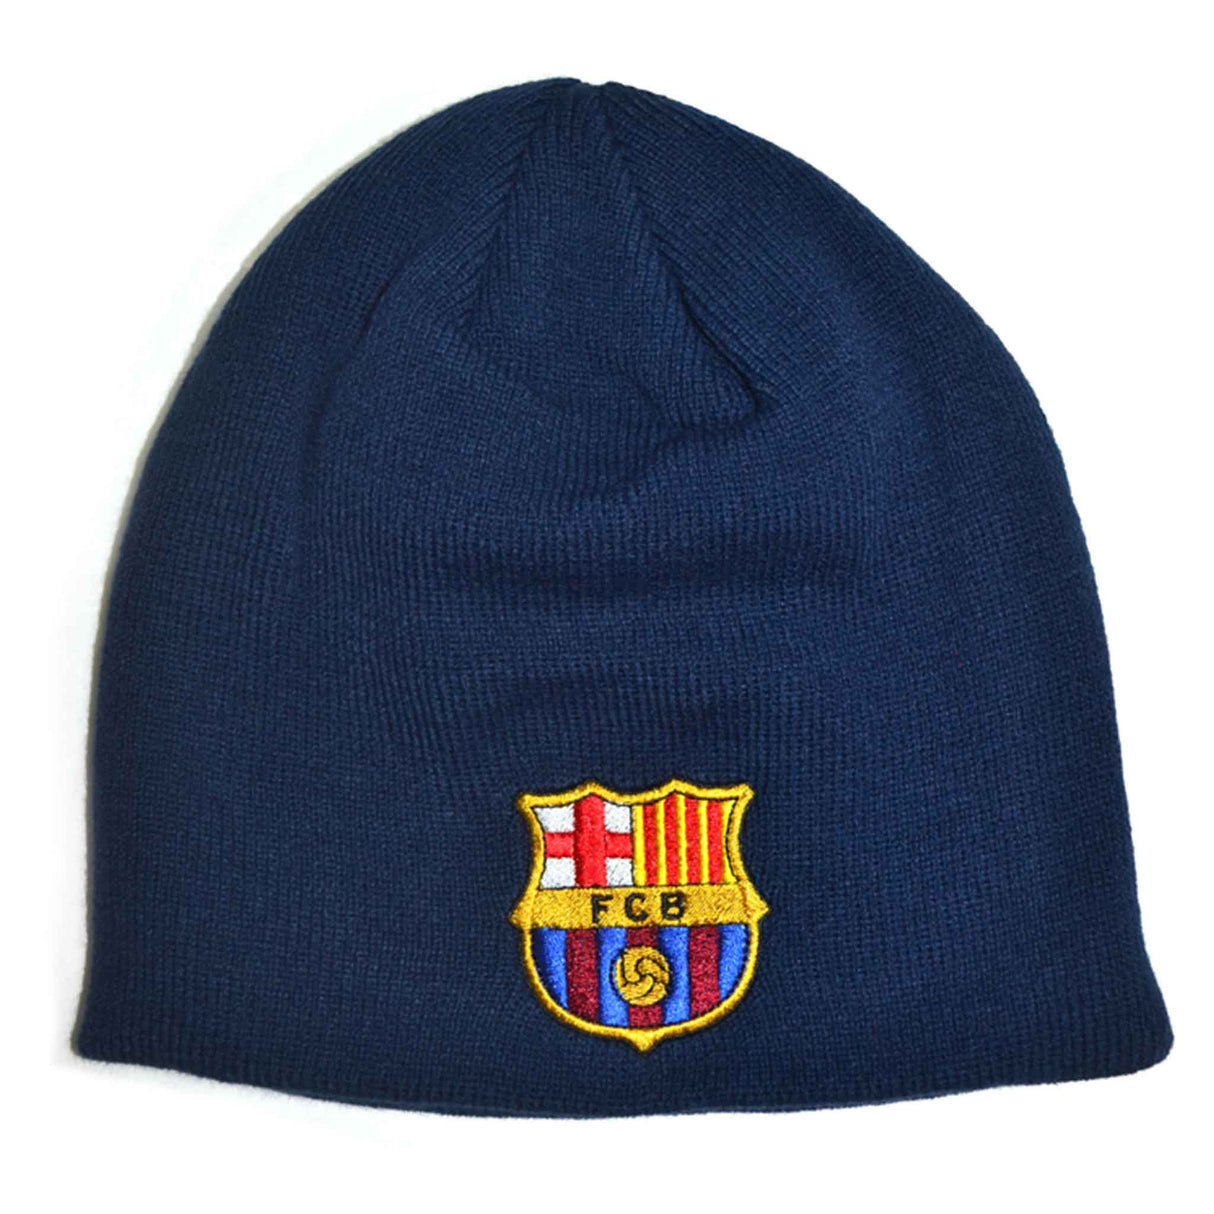 Tuque a revers barcelone FCB